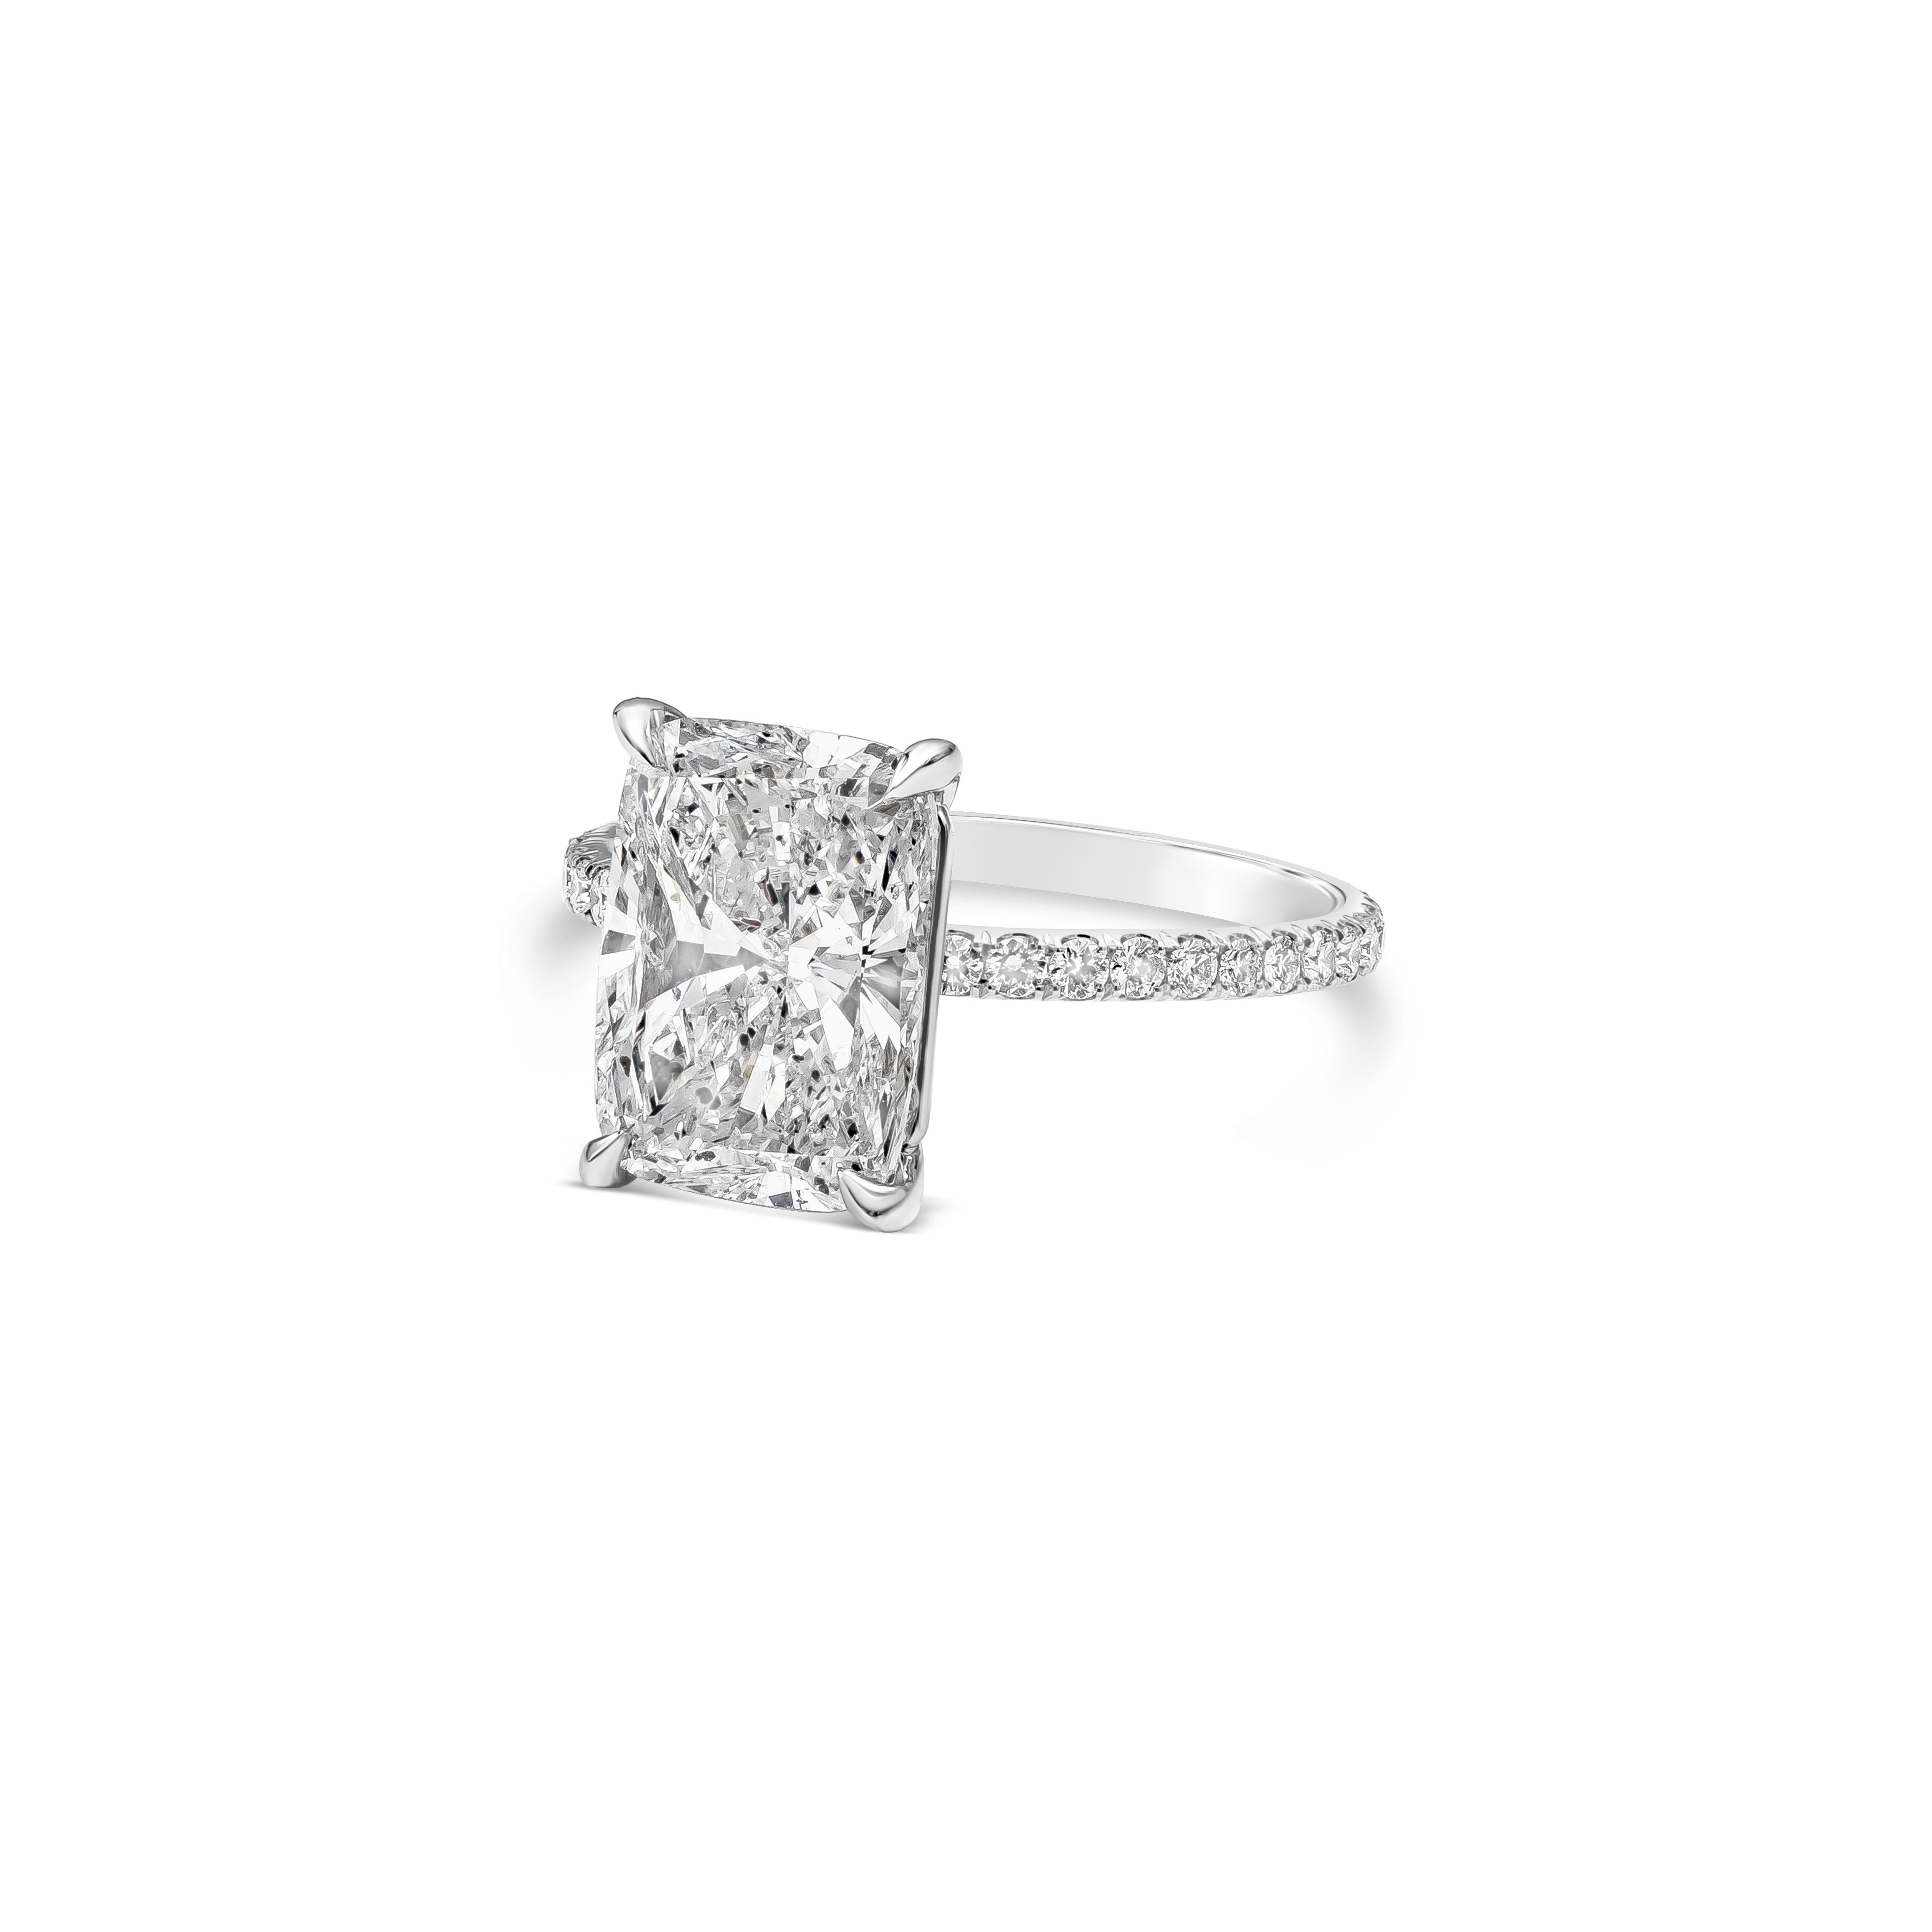 A classic and elegant piece of jewelry, showcasing a GIA certified elongated cushion cut diamond weighing 4.02 carats with D color and I1 clarity. Accented by 28 round brilliant cut diamonds weighing approximately 0.32 carat total with E color and